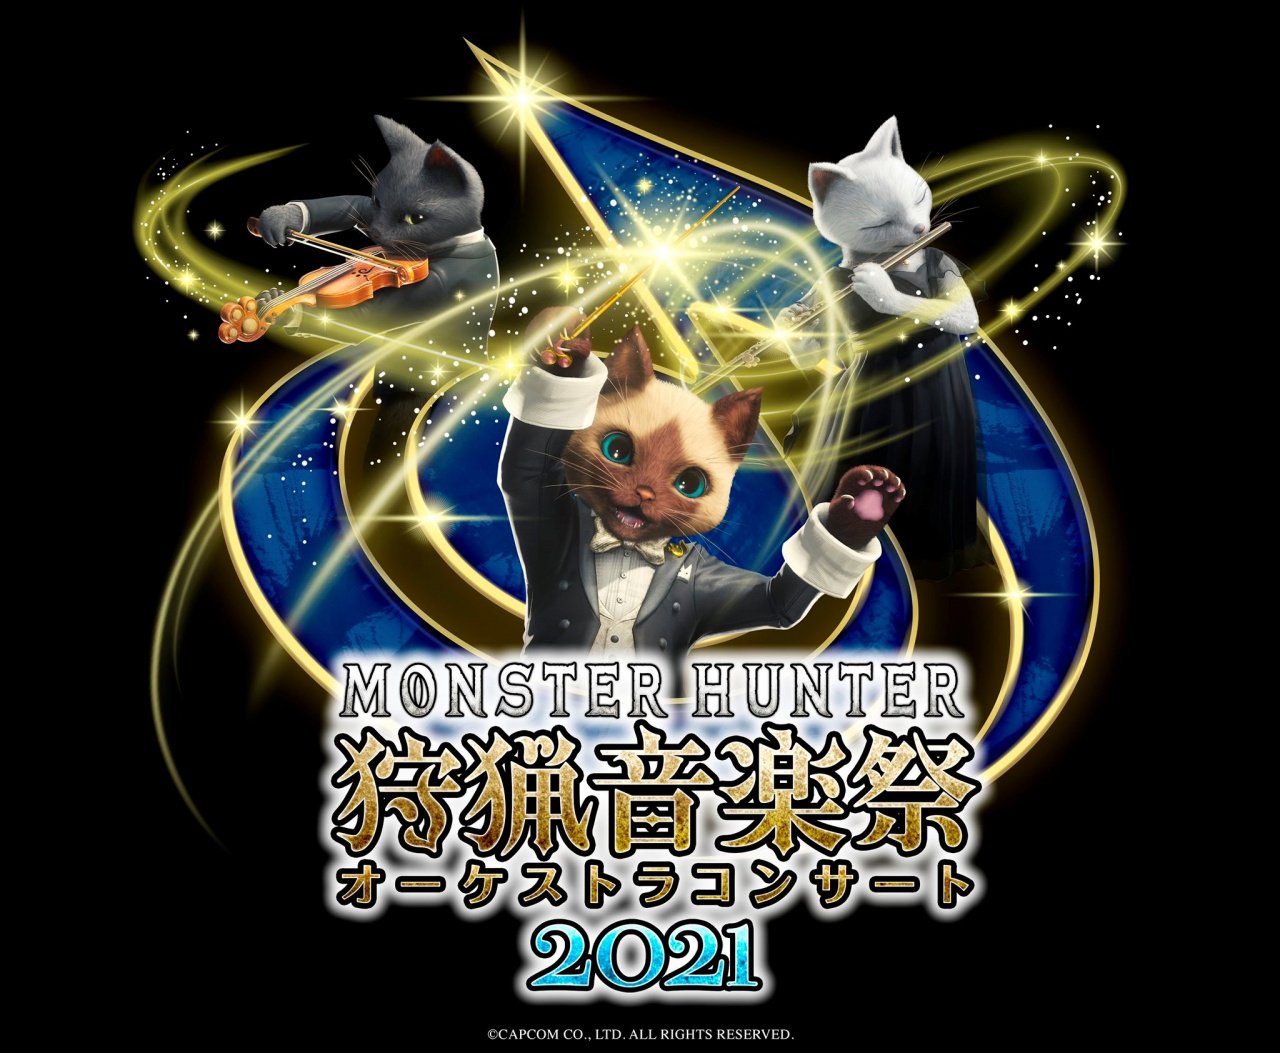 Ace Attorney Online Orchestra Concert Announced For April 10, 2021